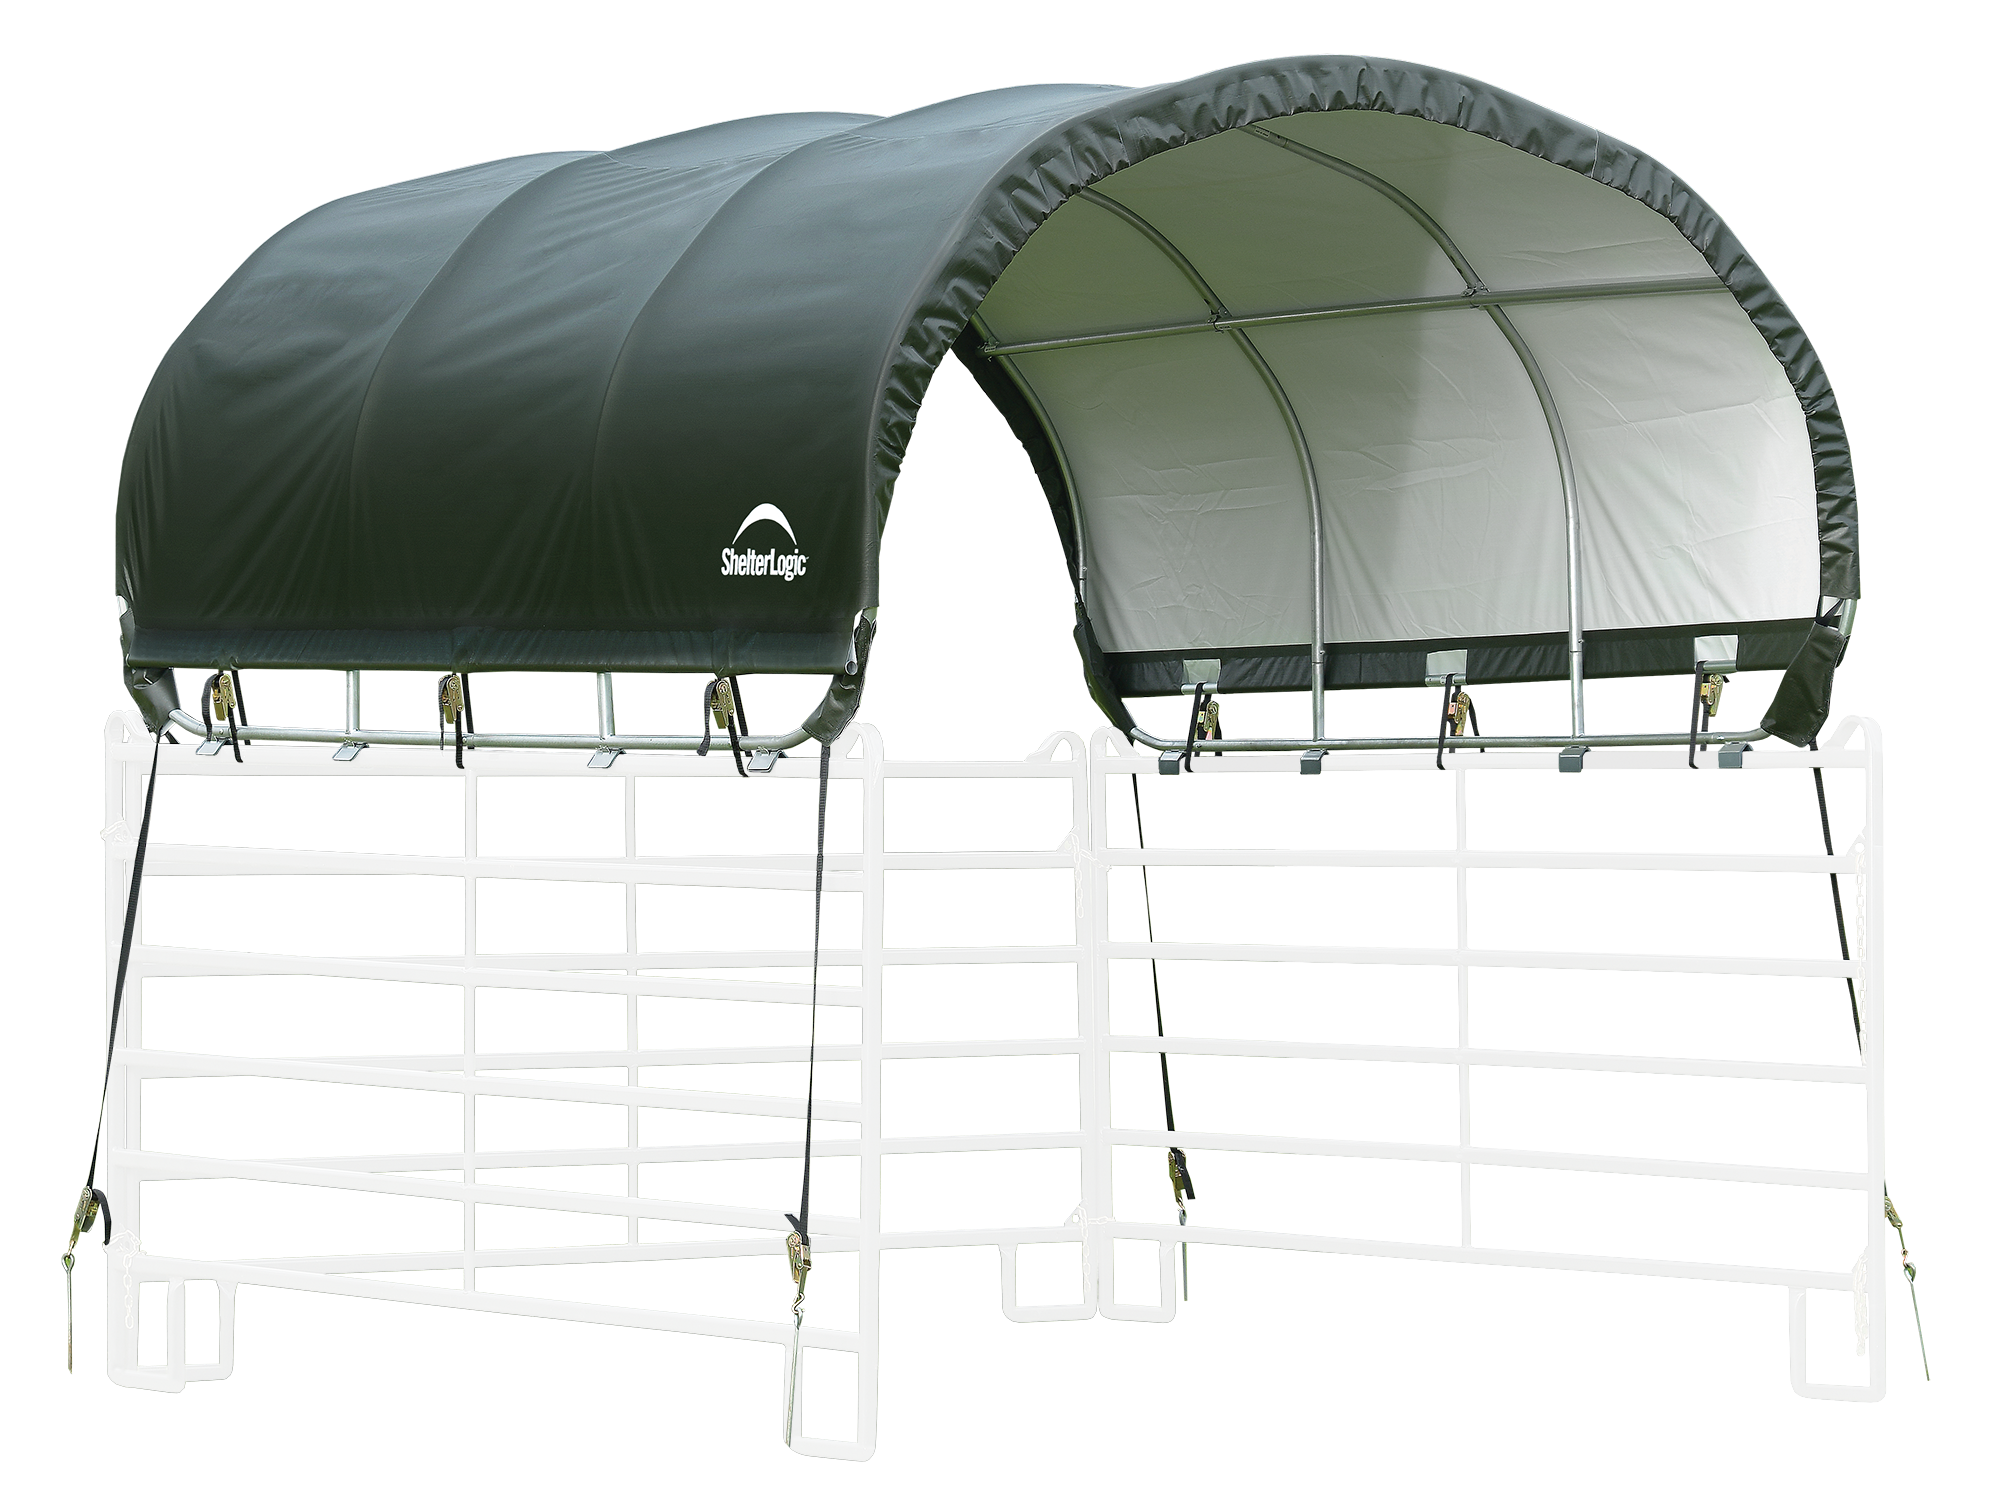 ShelterLogic in Canopy Storage Shelter department x Canopy the Shelters 11.17-ft Storage at 10.12-ft